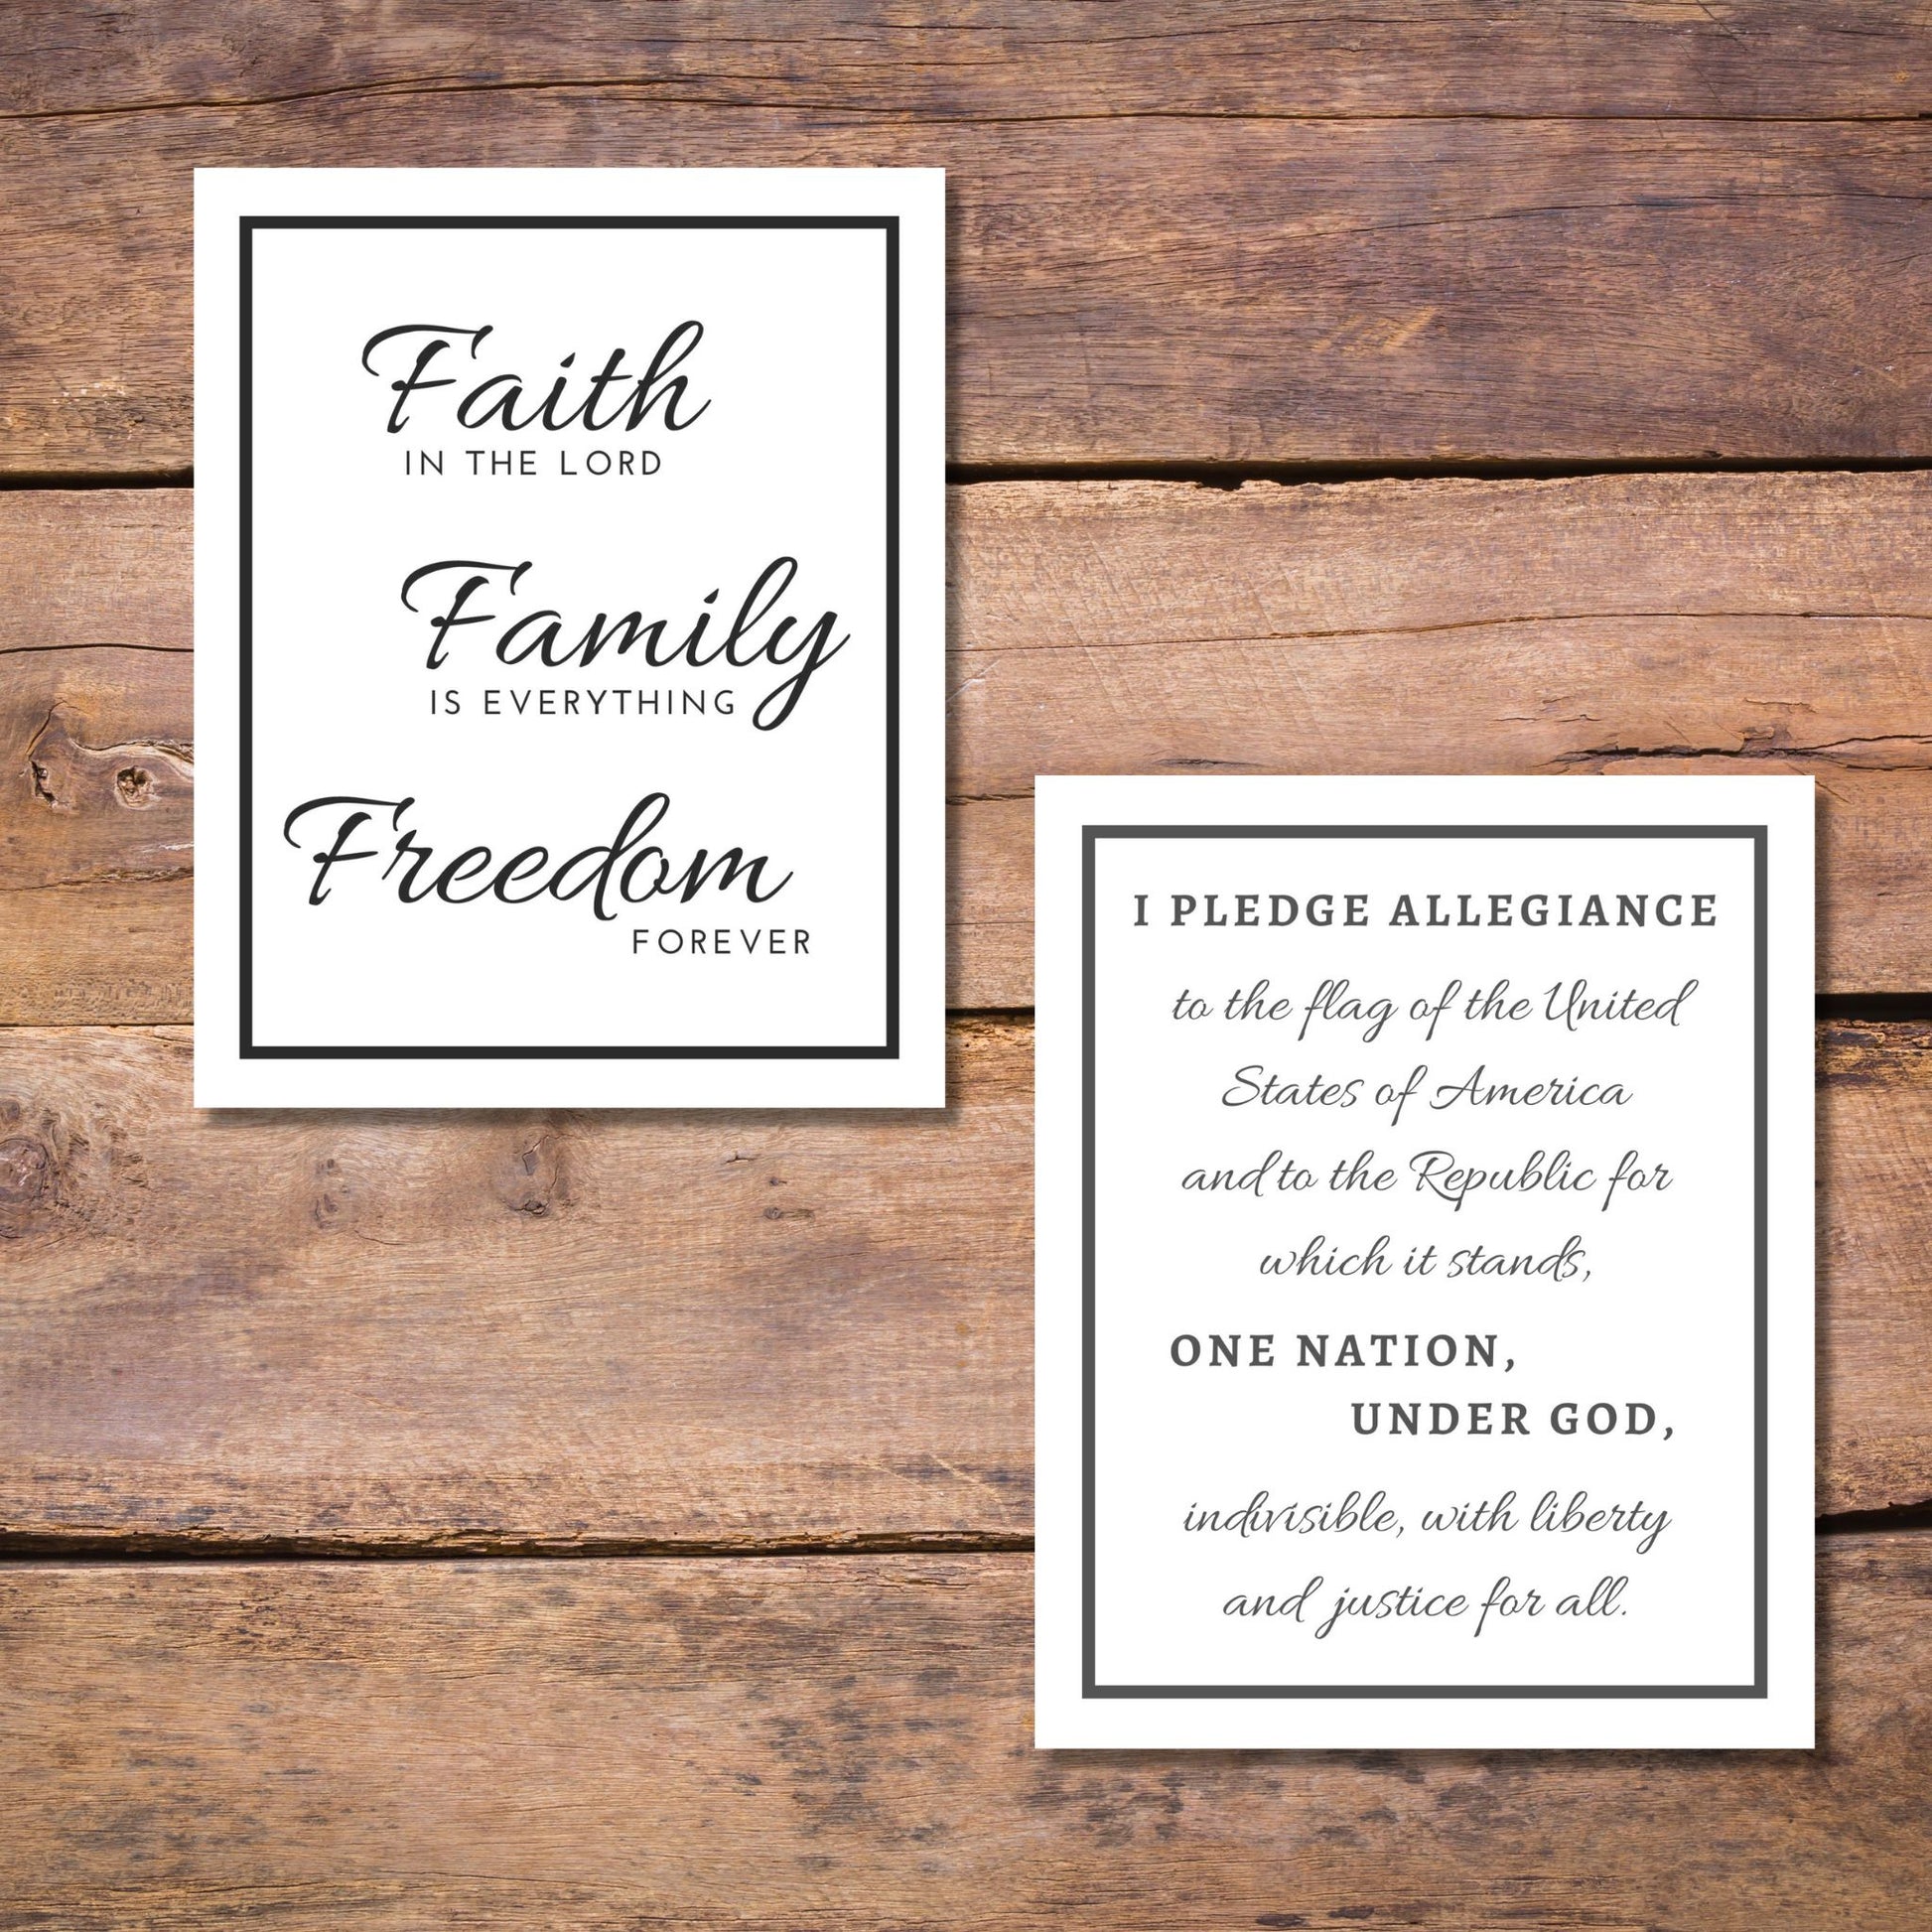 FREE printable downloads | Inspirational Word Art Faith Family Freedom reads... Faith IN THE LORD Family IS EVERYTHING Freedom FOREVER | Shown with Patriotic Word Art - Pledge of Allegiance that reads… I PLEDGE ALLEGIANCE to the flag of the United States of America and to the Republic for which it stands, ONE NATION, UNDER GOD, indivisible, with liberty and justice for all. | Both shown in Black and White with Black Border | oak7west.com